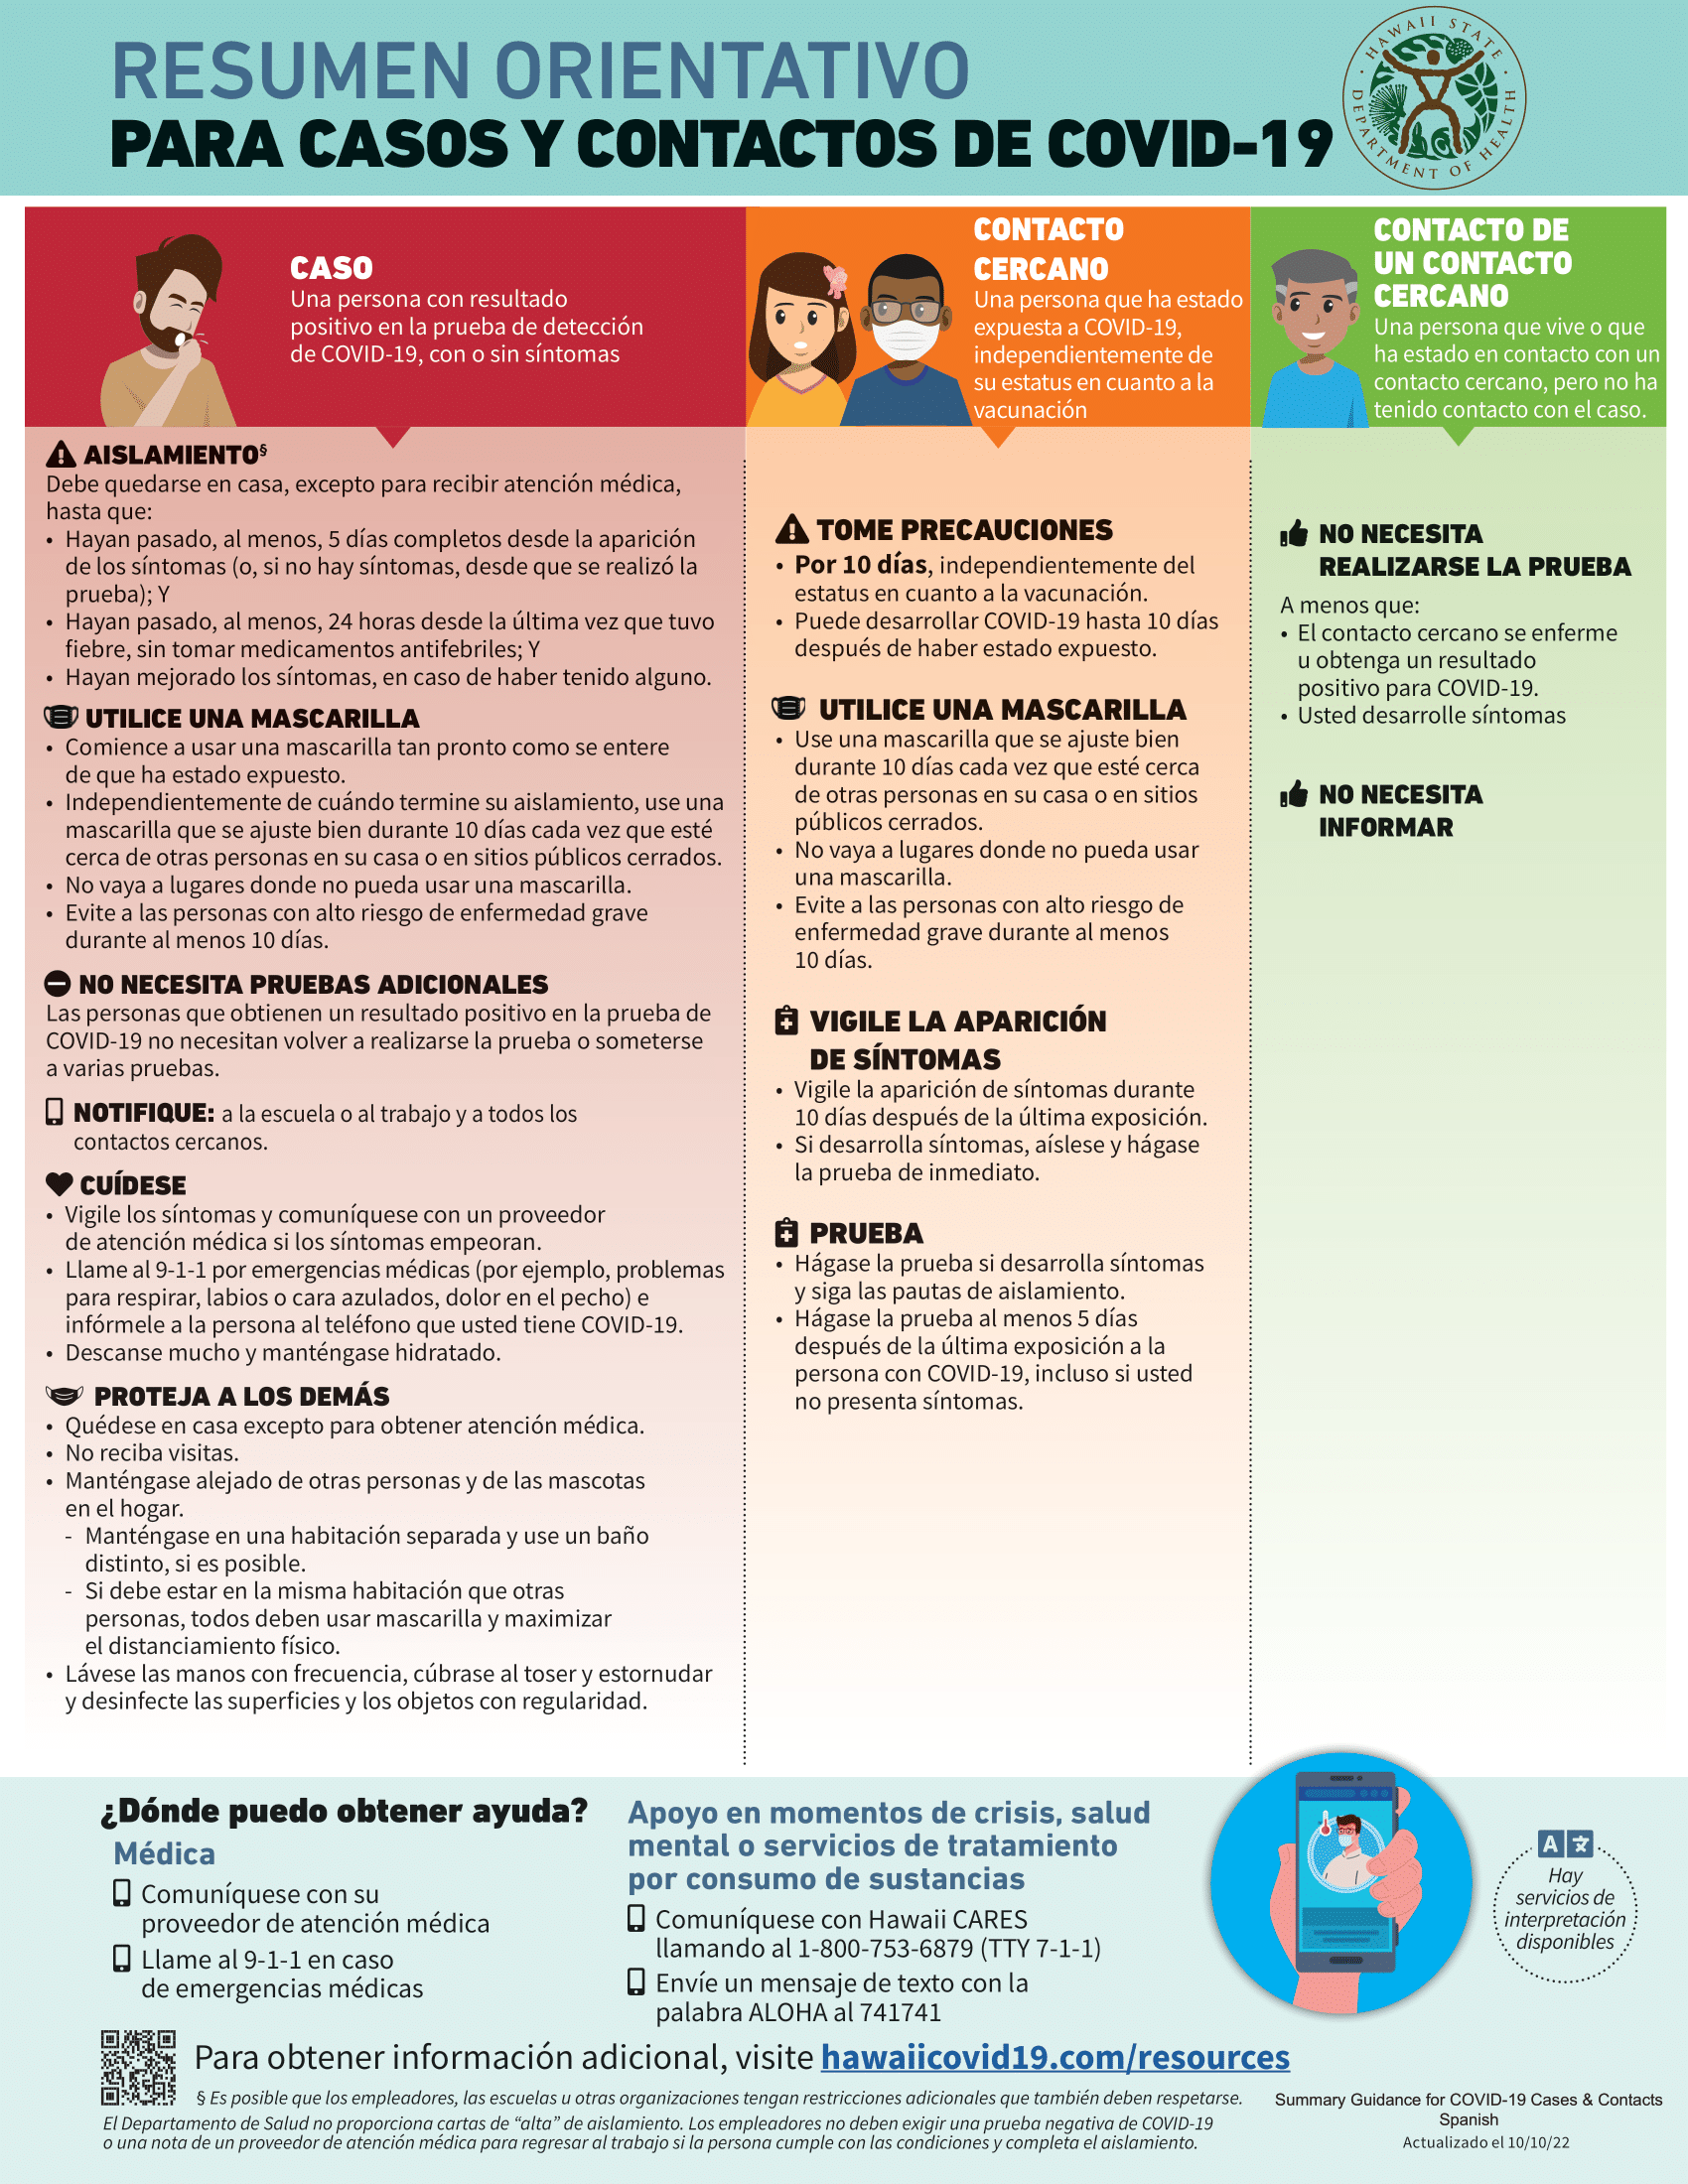 Summary Guidance for COVID-19 Cases and Contacts